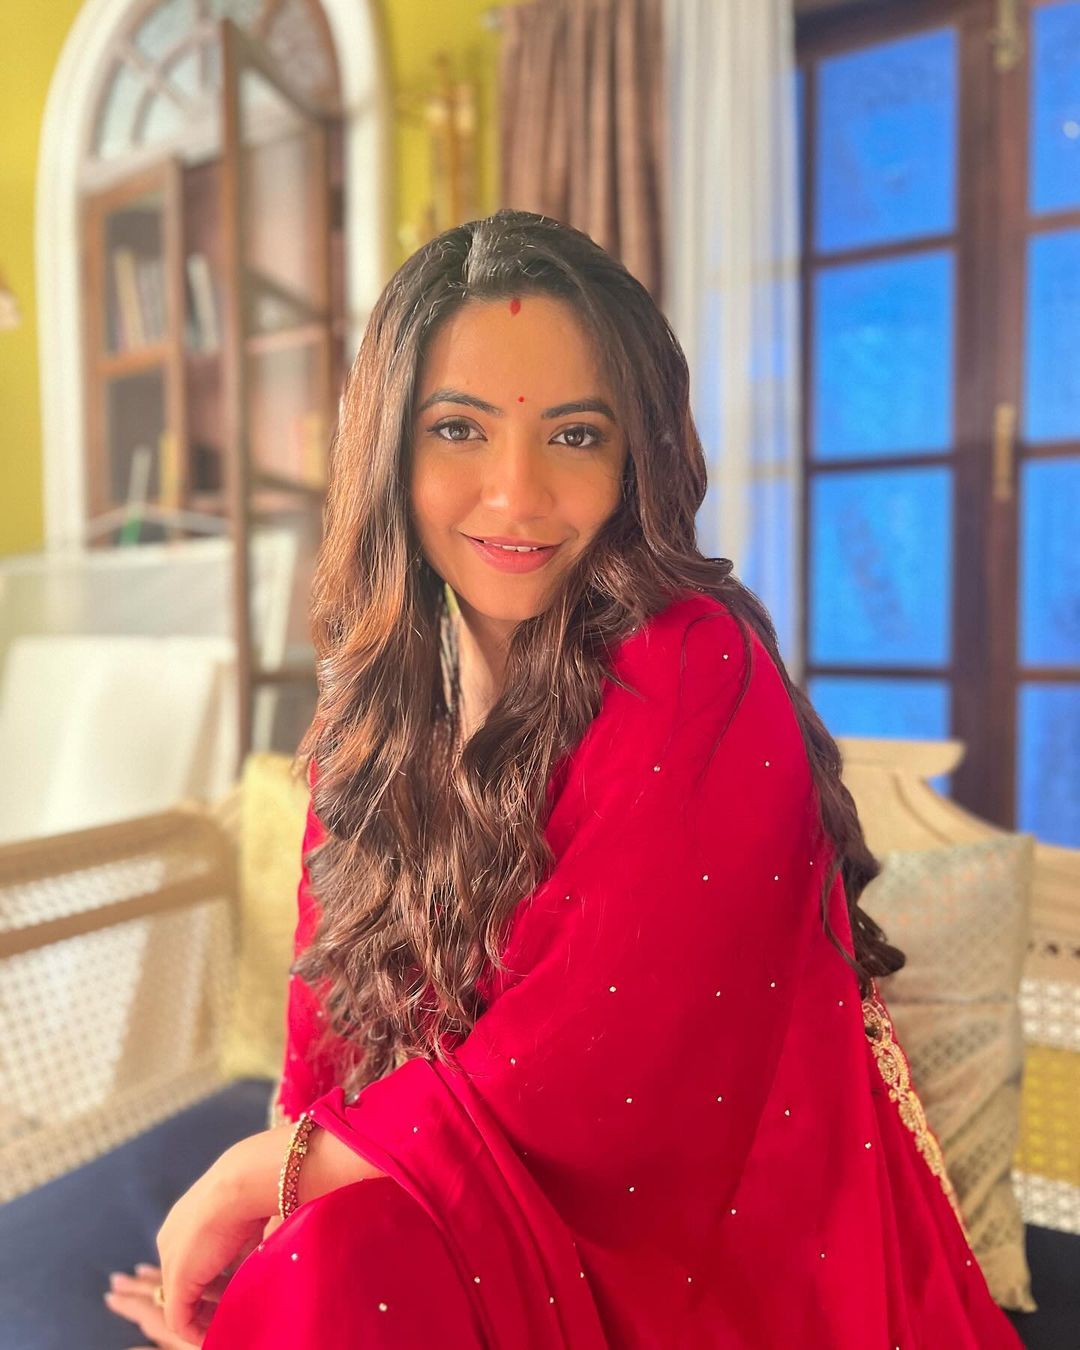 Exclusive! Talented Actress Meera Deosthale On Her New Role In The Show Kuch Reet Jagat Ki Aisi Hai. She Says I Am So Excited To Play A Character With A Strong Purpose.